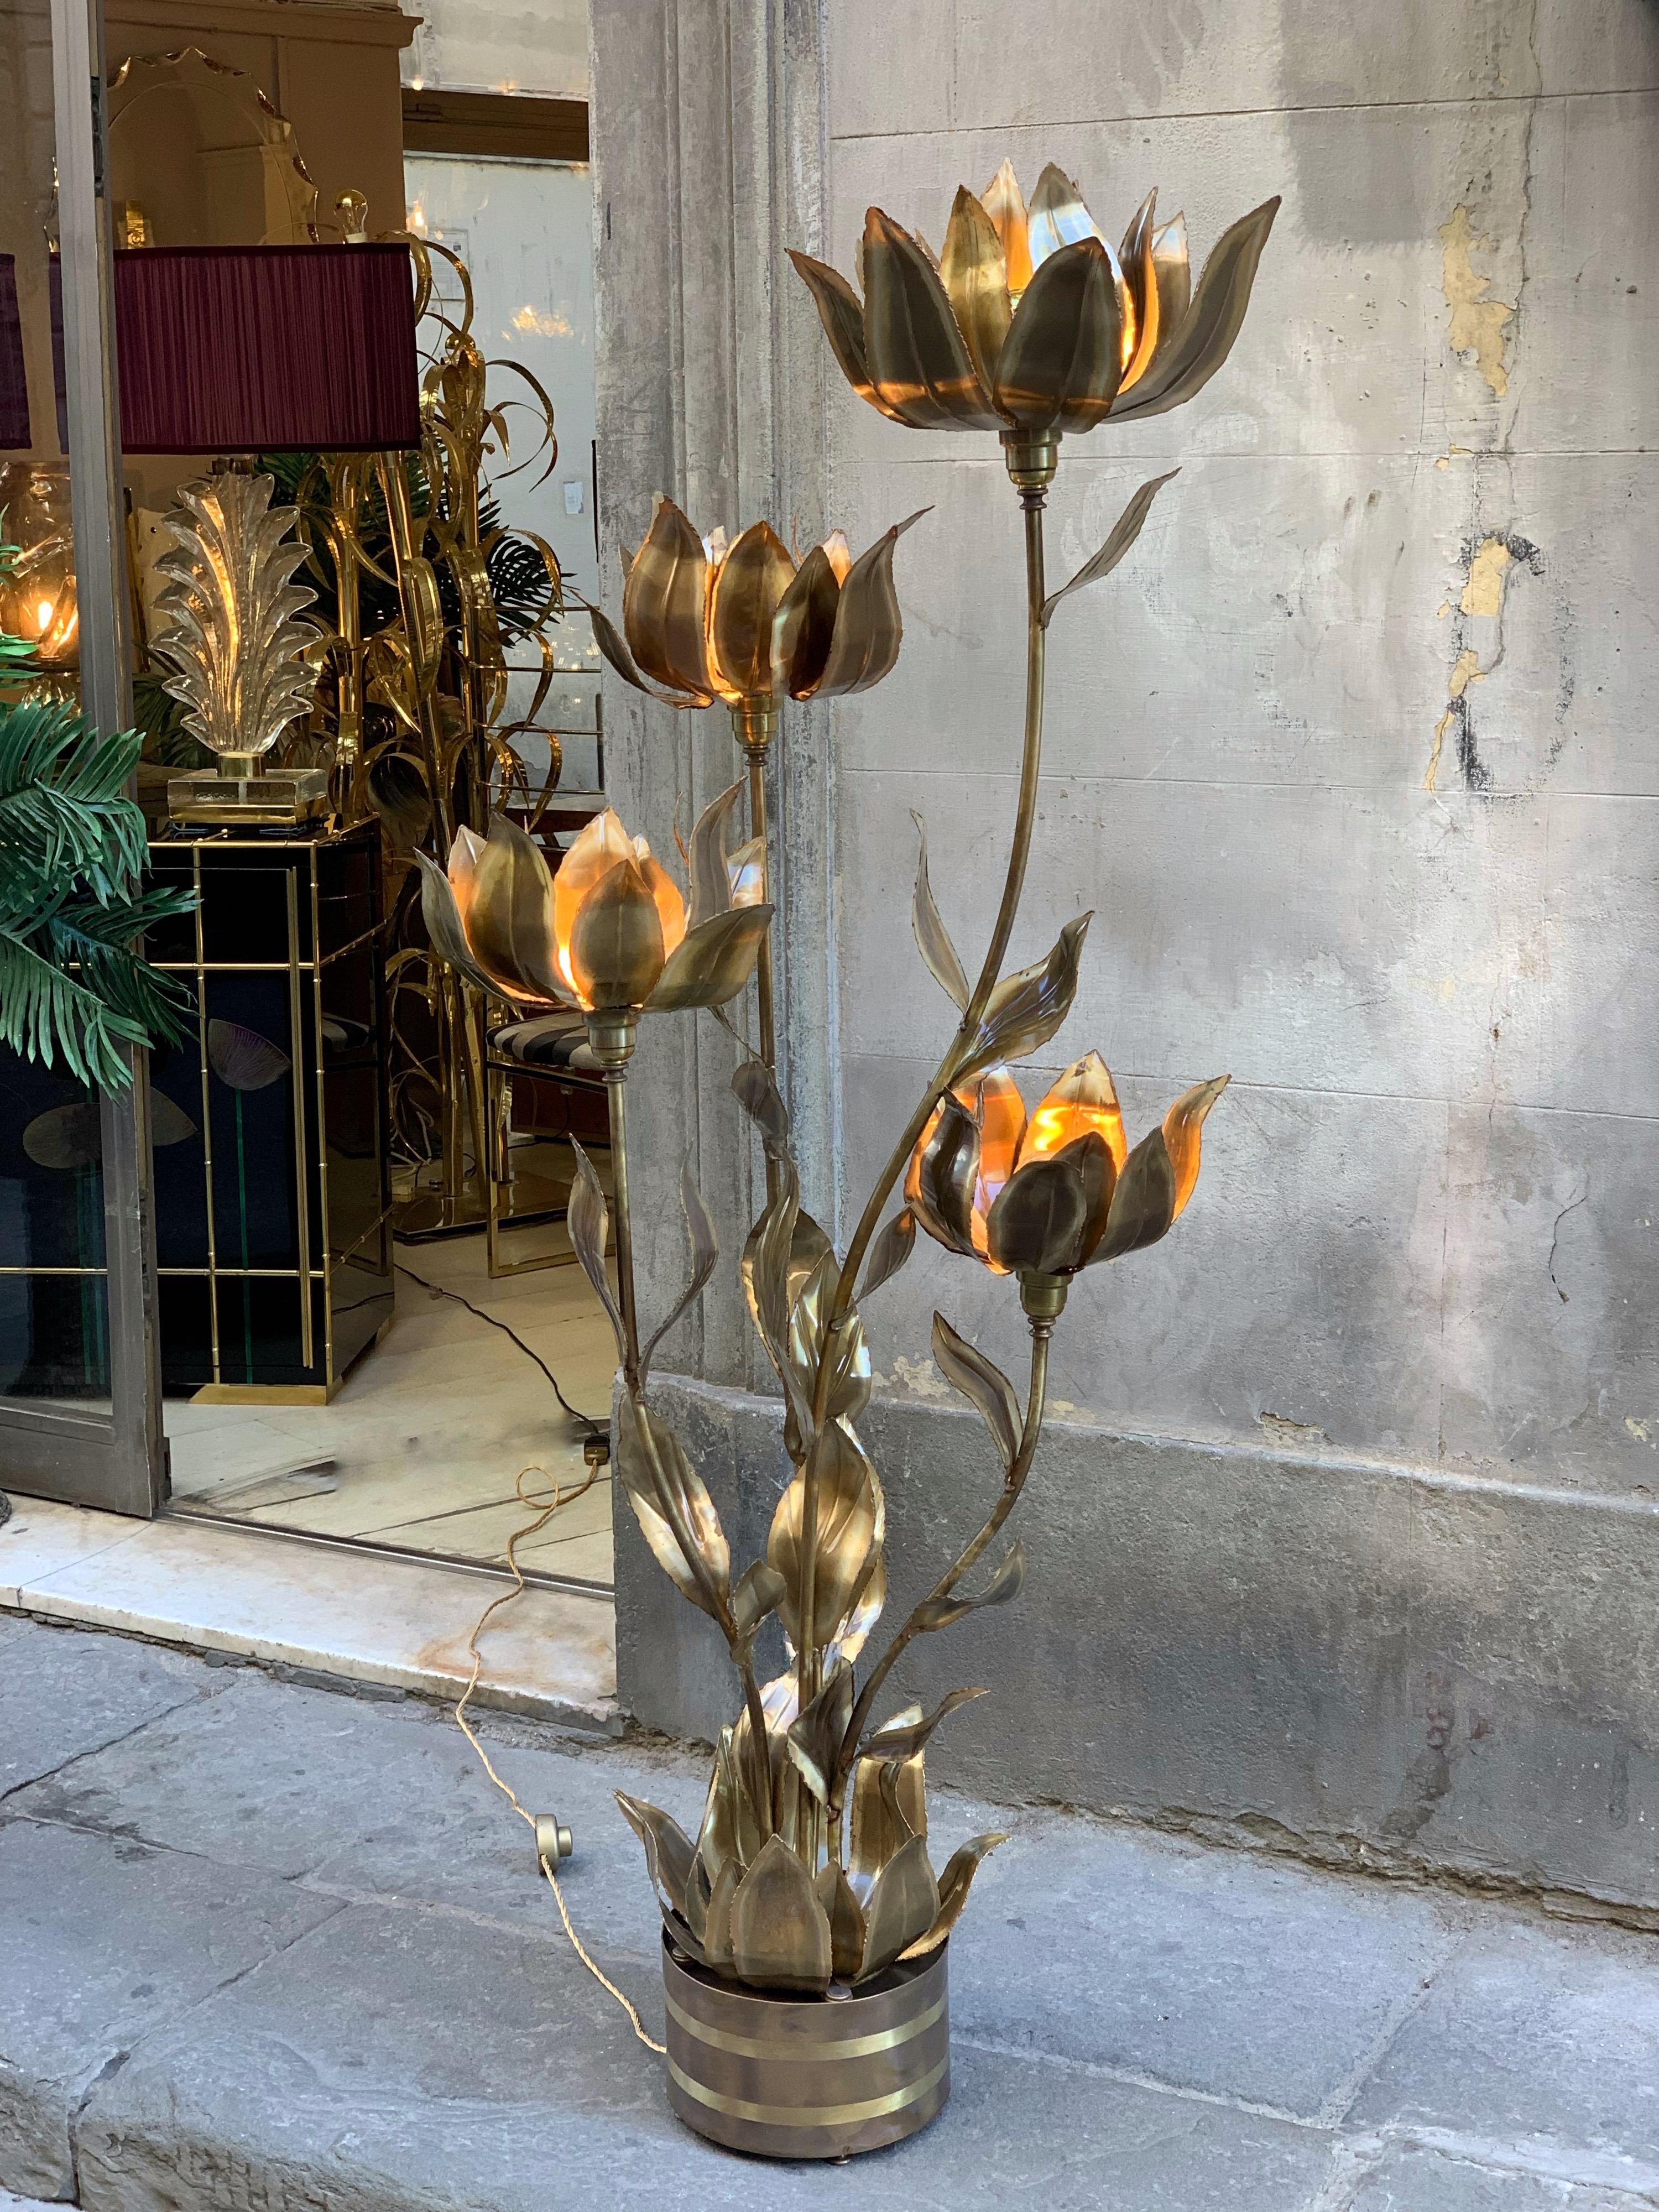 Enlightening plant brass leaves floor lamp. This highly decorative floor lamp is formed into sharp leaves and flowers and it has four light bulbs.